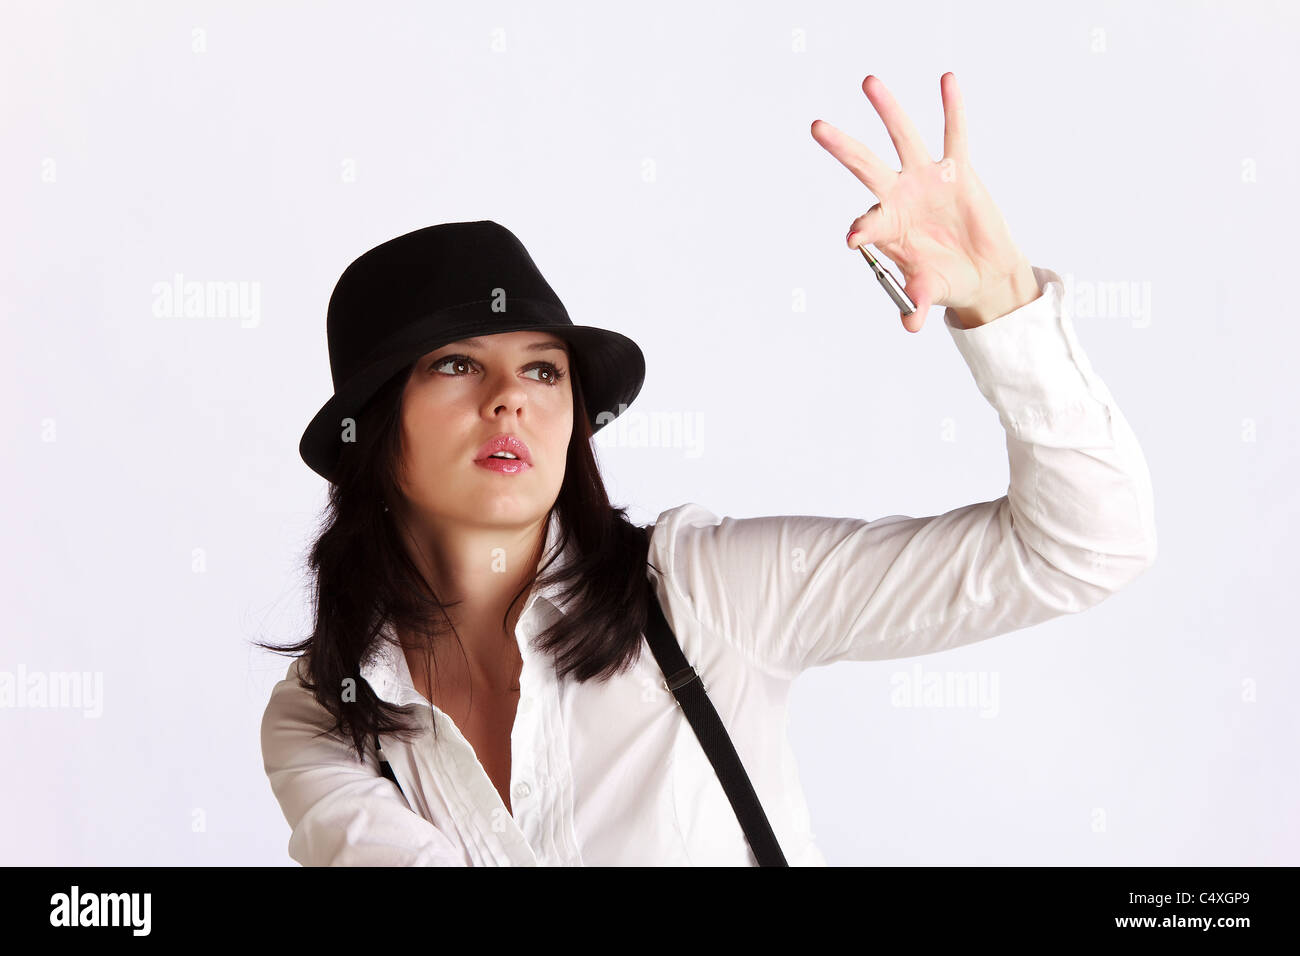 Young woman in hat with brim holding a machine-gun ammo between her fingers Stock Photo